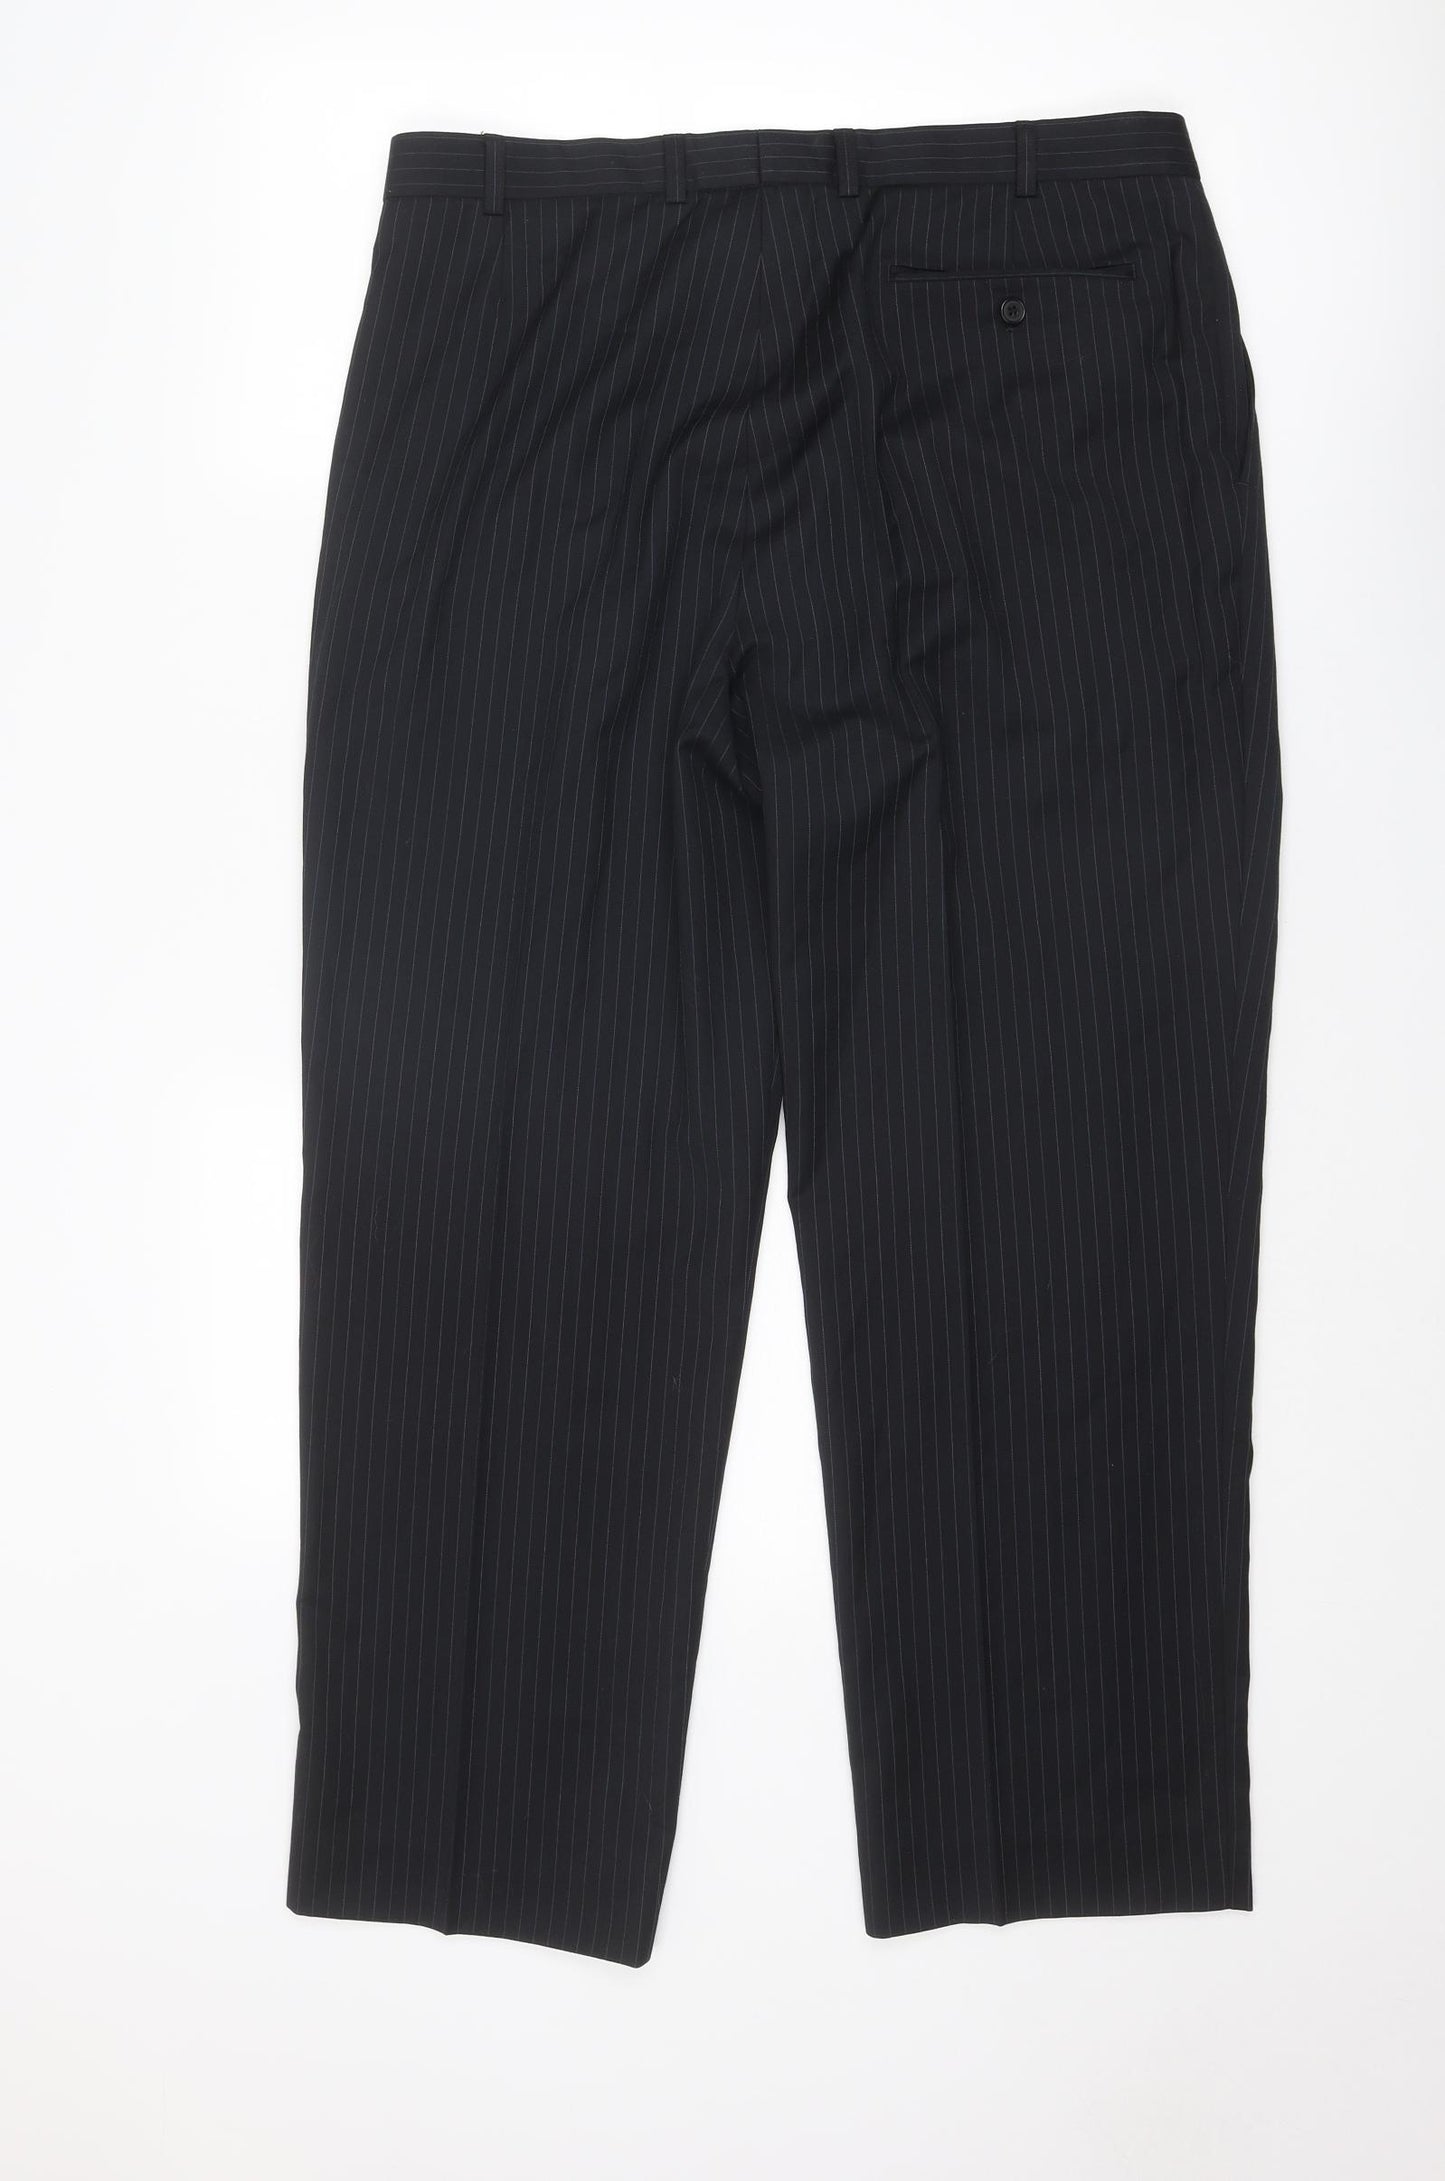 Marks and Spencer Mens Black Striped Polyester Dress Pants Trousers Size 36 in L28 in Regular Zip